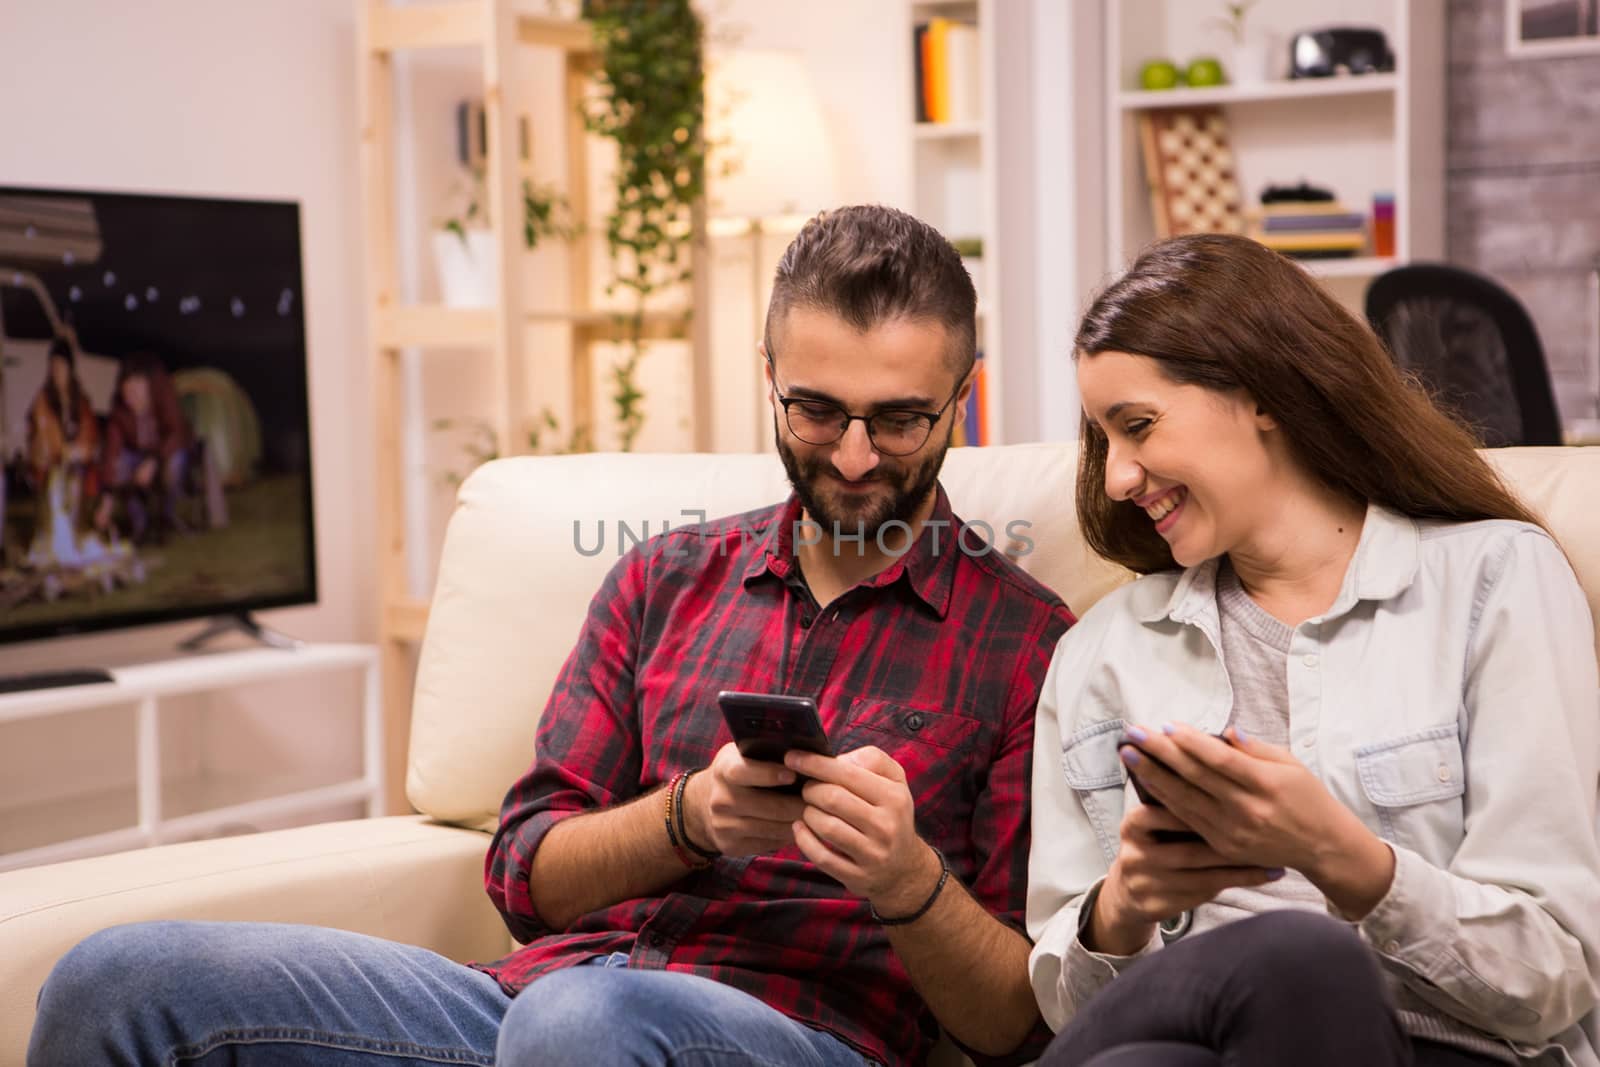 Caucasian man showing something to his girlfriend on the phone while relaxing on sofa. Couple laughing.